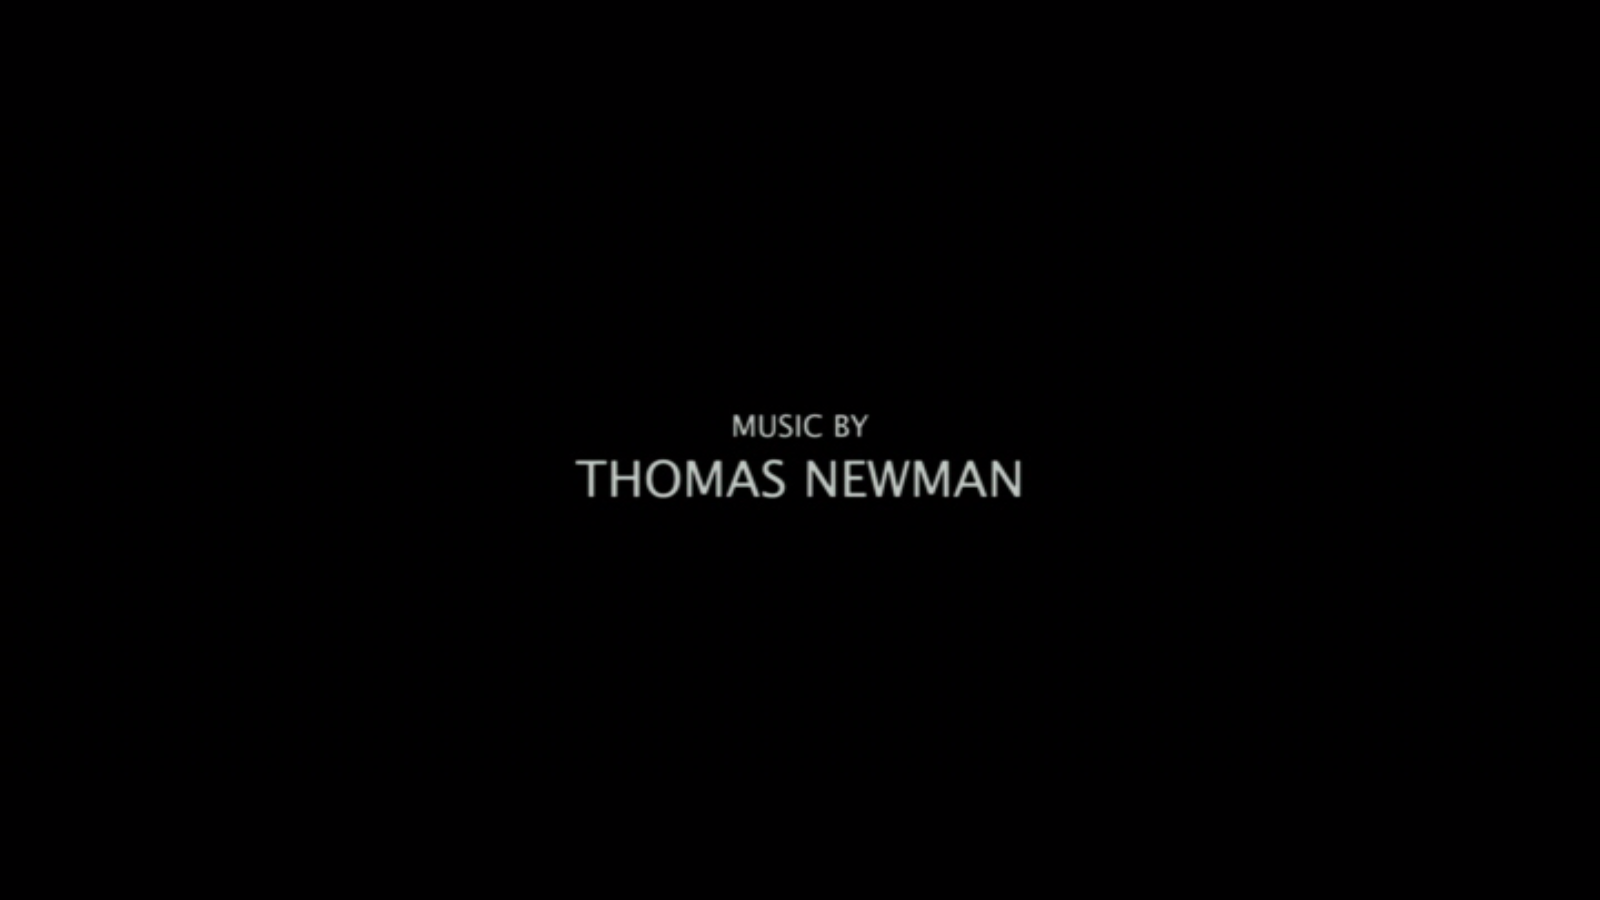 THE COMPOSER CREDITS PROJECT: THOMAS NEWMAN